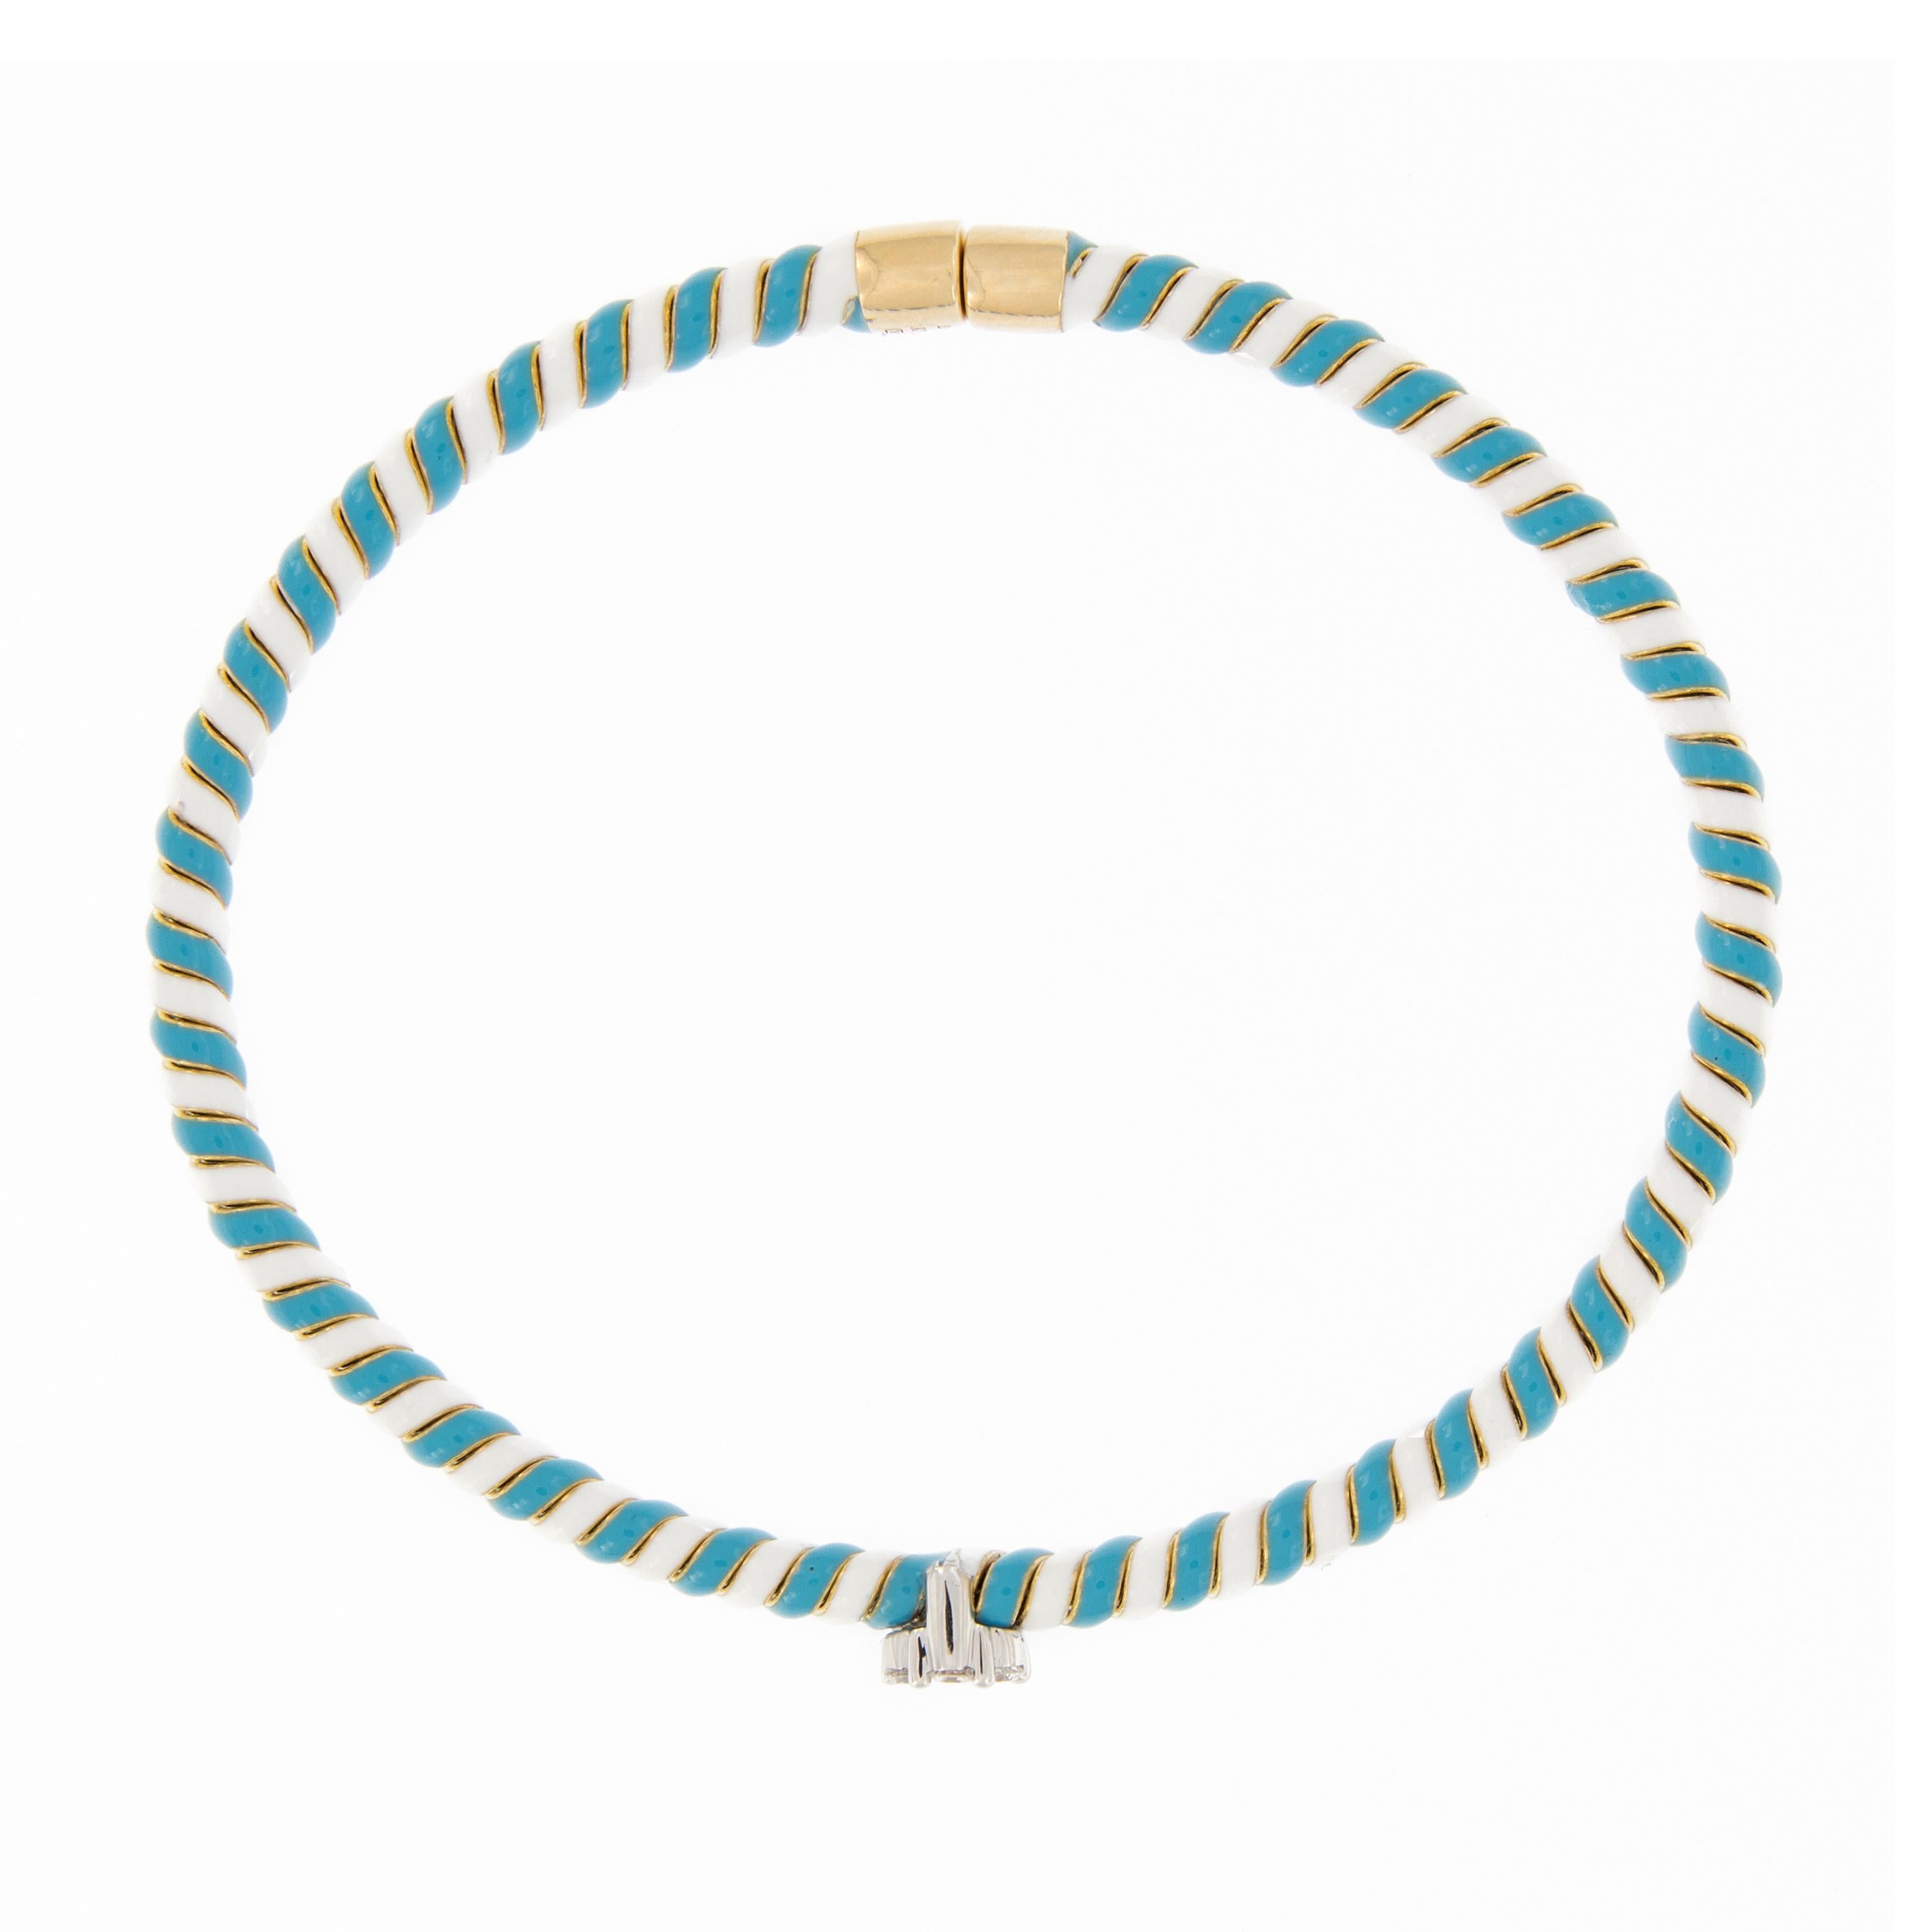 18 Karat gold bracelet features a twisted design of white and turquoise enamel accented with a diamond flower cluster. Bracelet is beautifully handcrafted by Italian artisans, lovely on its own and perfect for stacking. Marked Italy. The inner